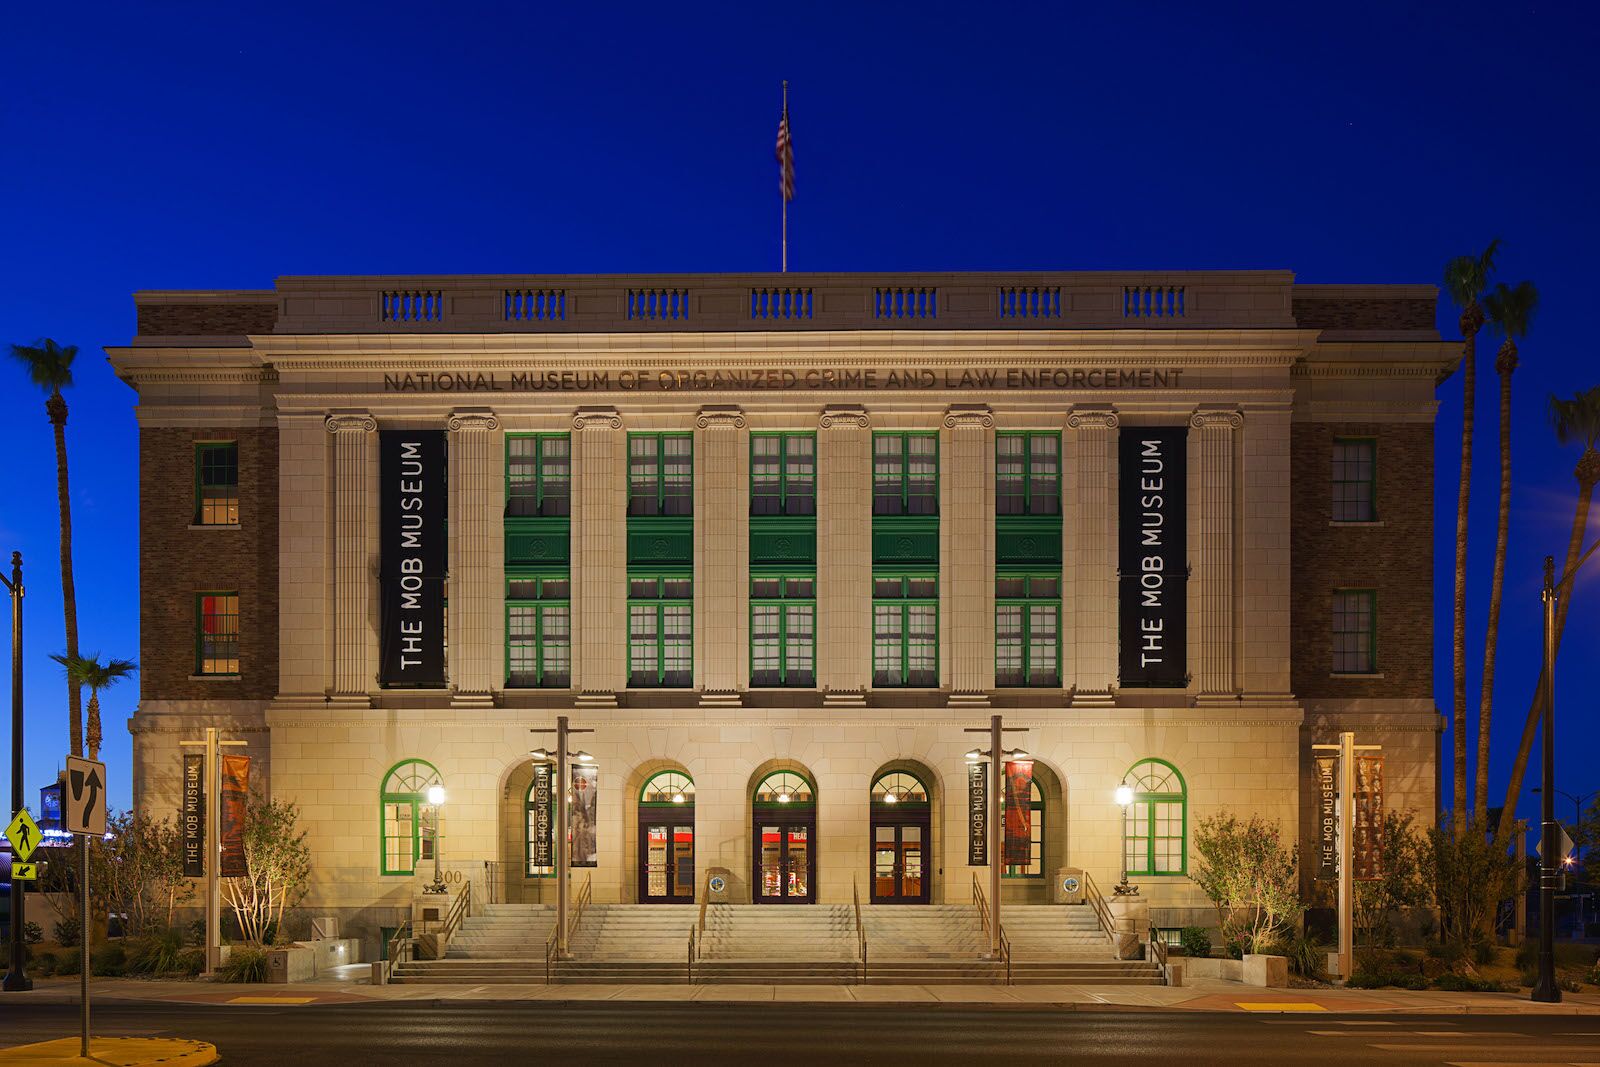 The facade of the Mob Museum in Las Vegas